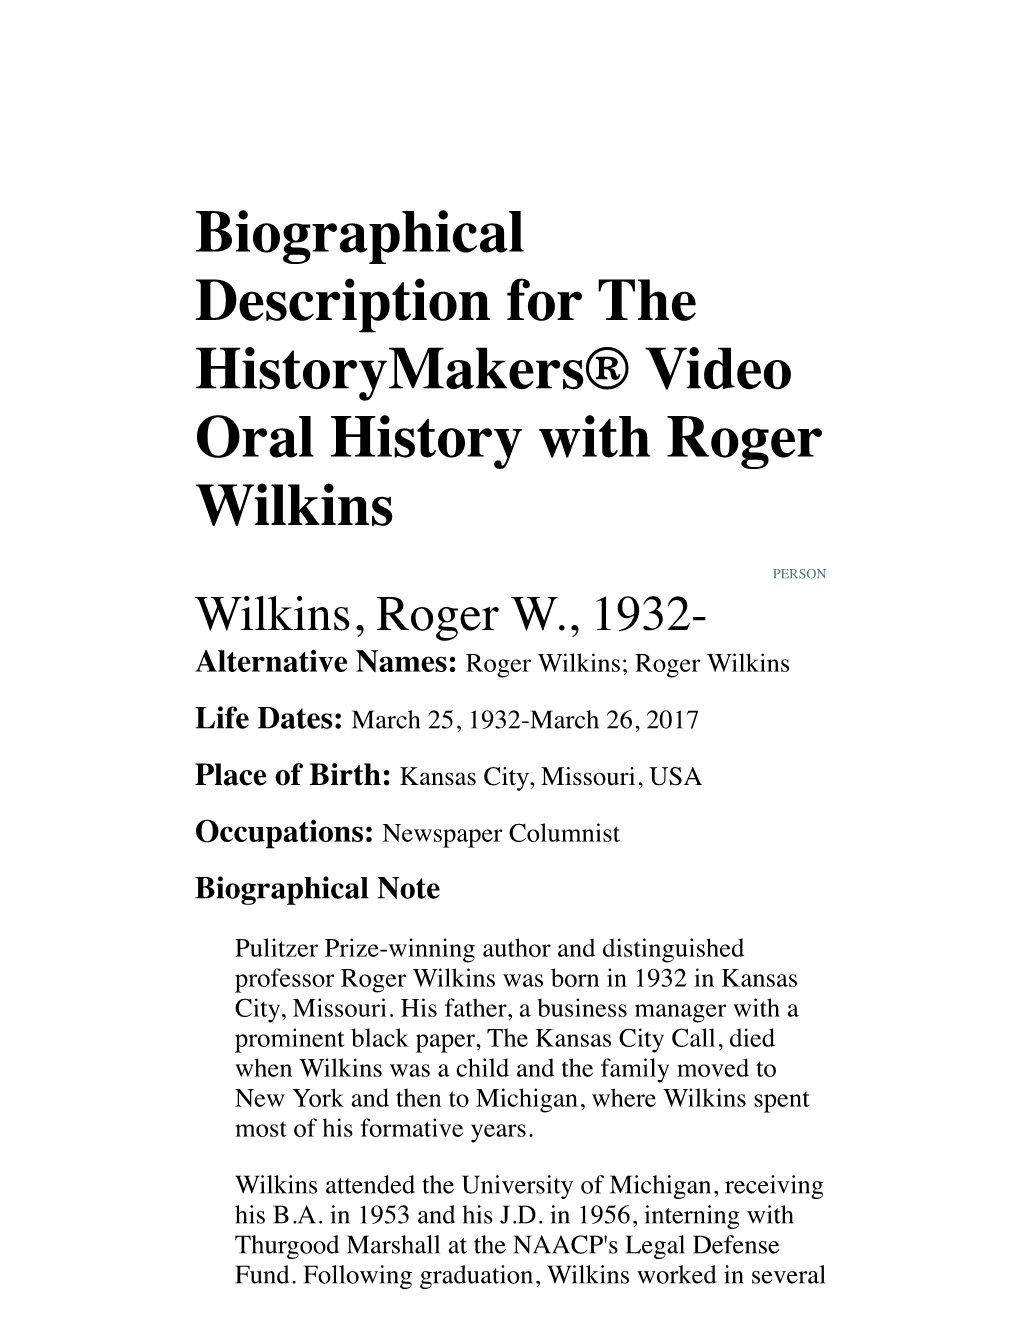 Biographical Description for the Historymakers® Video Oral History with Roger Wilkins